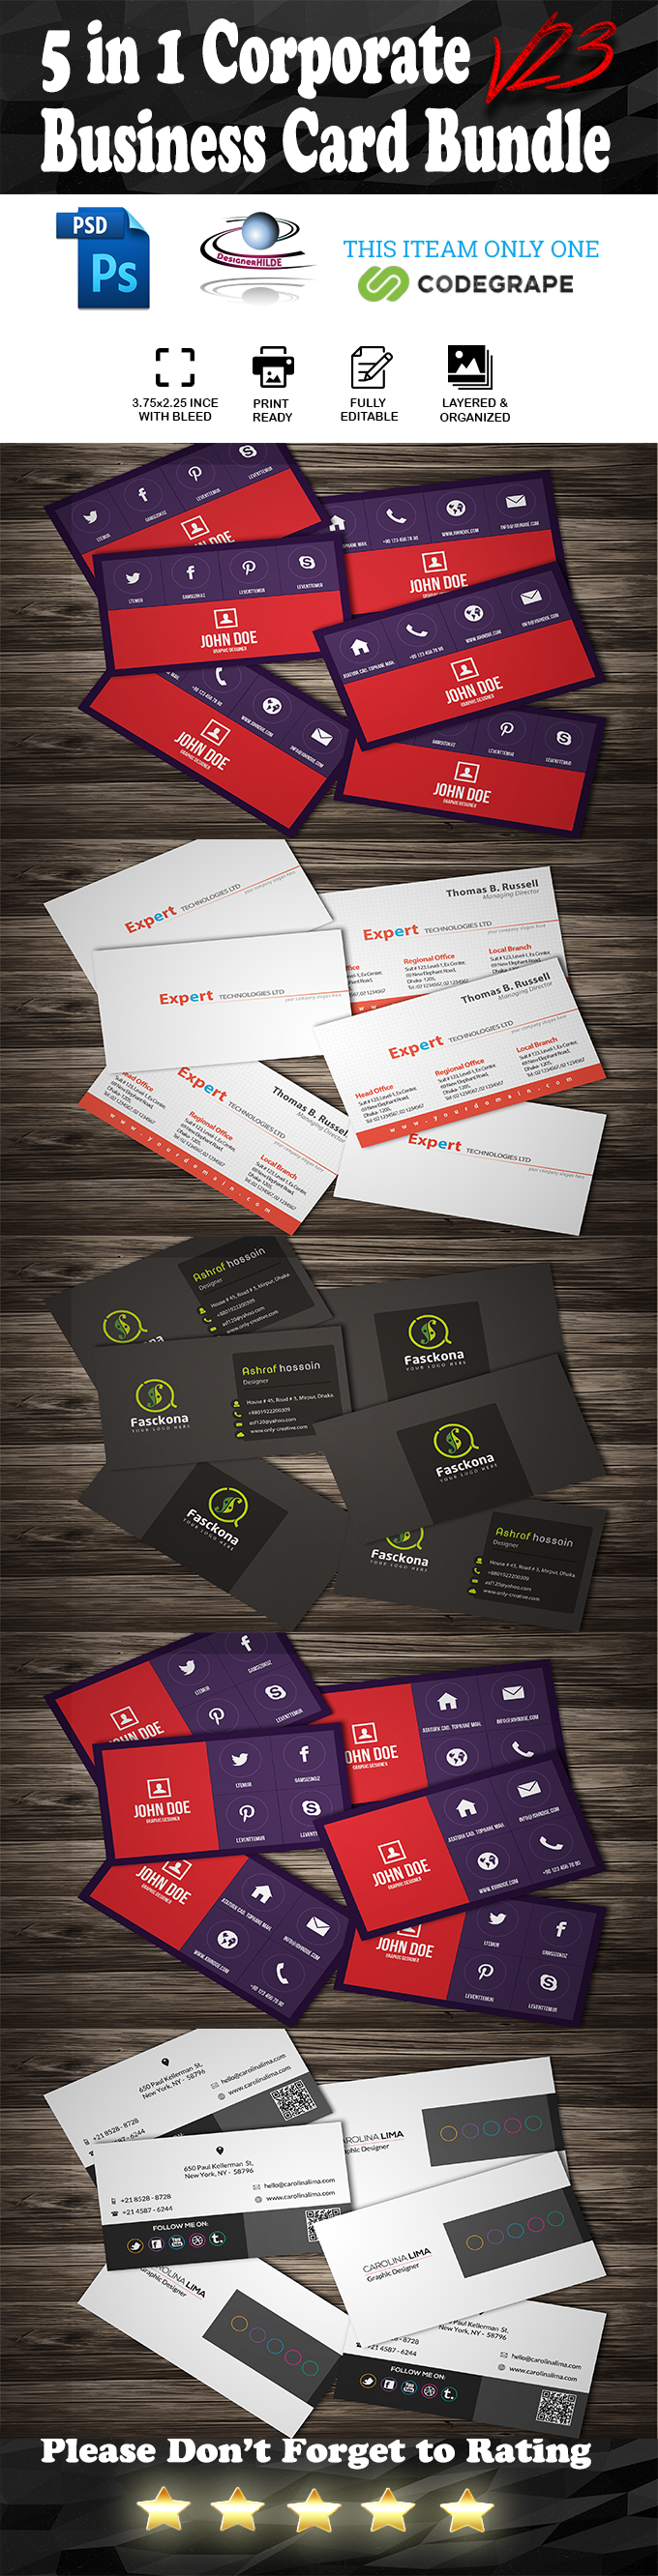 5 in 1 Corporate Business Card Bundle V. 23